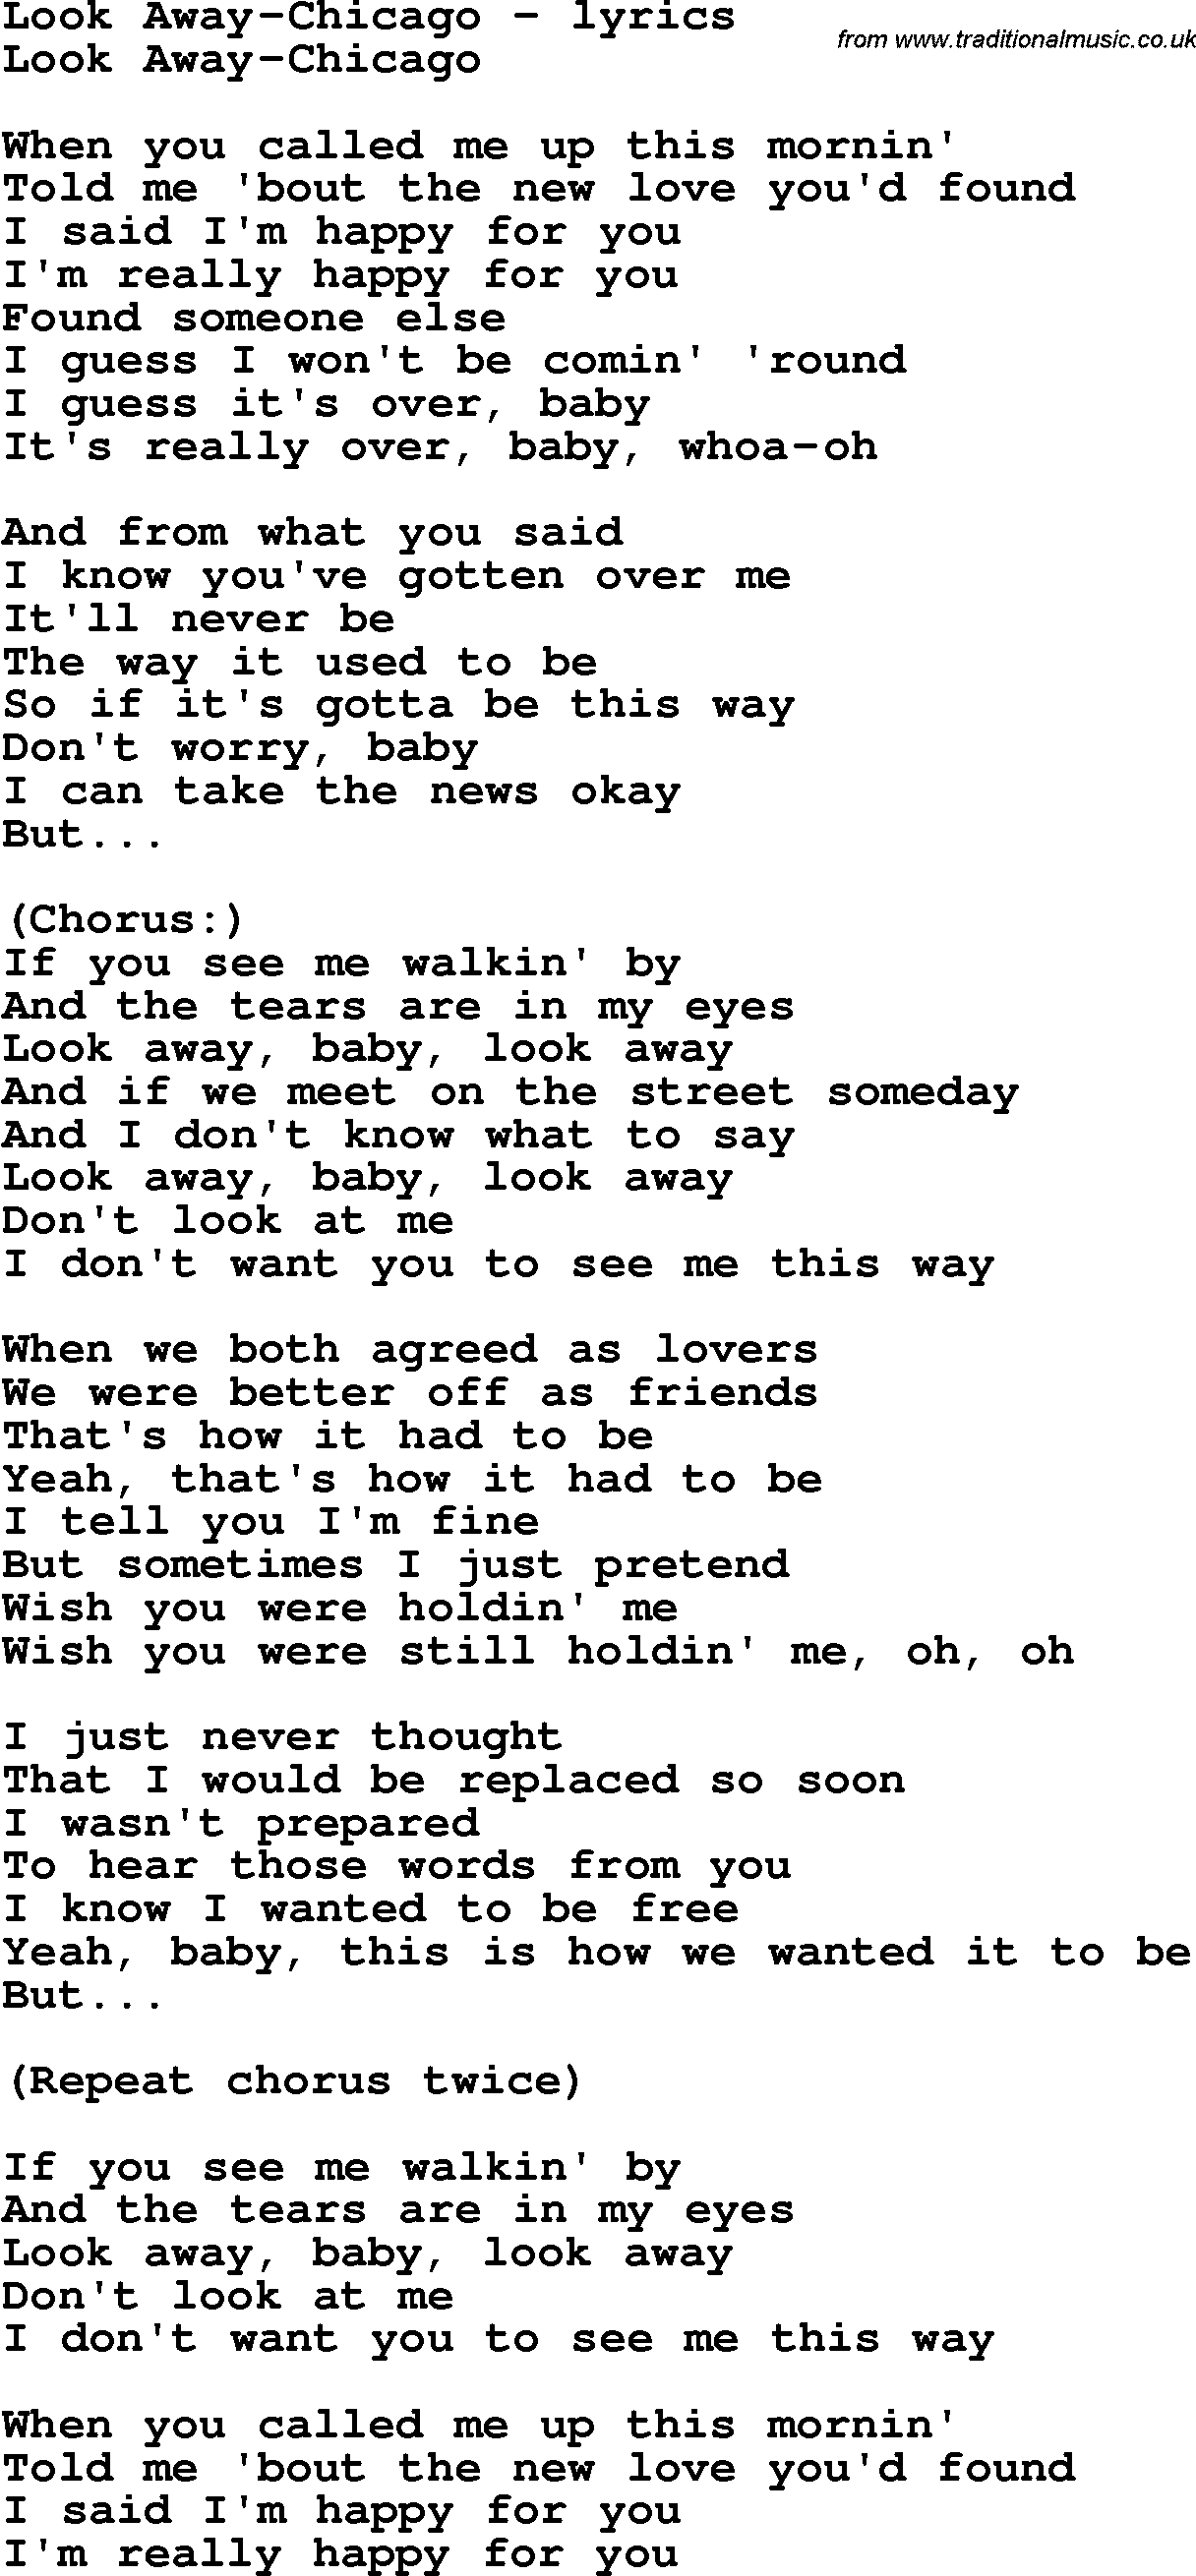 Love Song Lyrics for: Look Away-Chicago